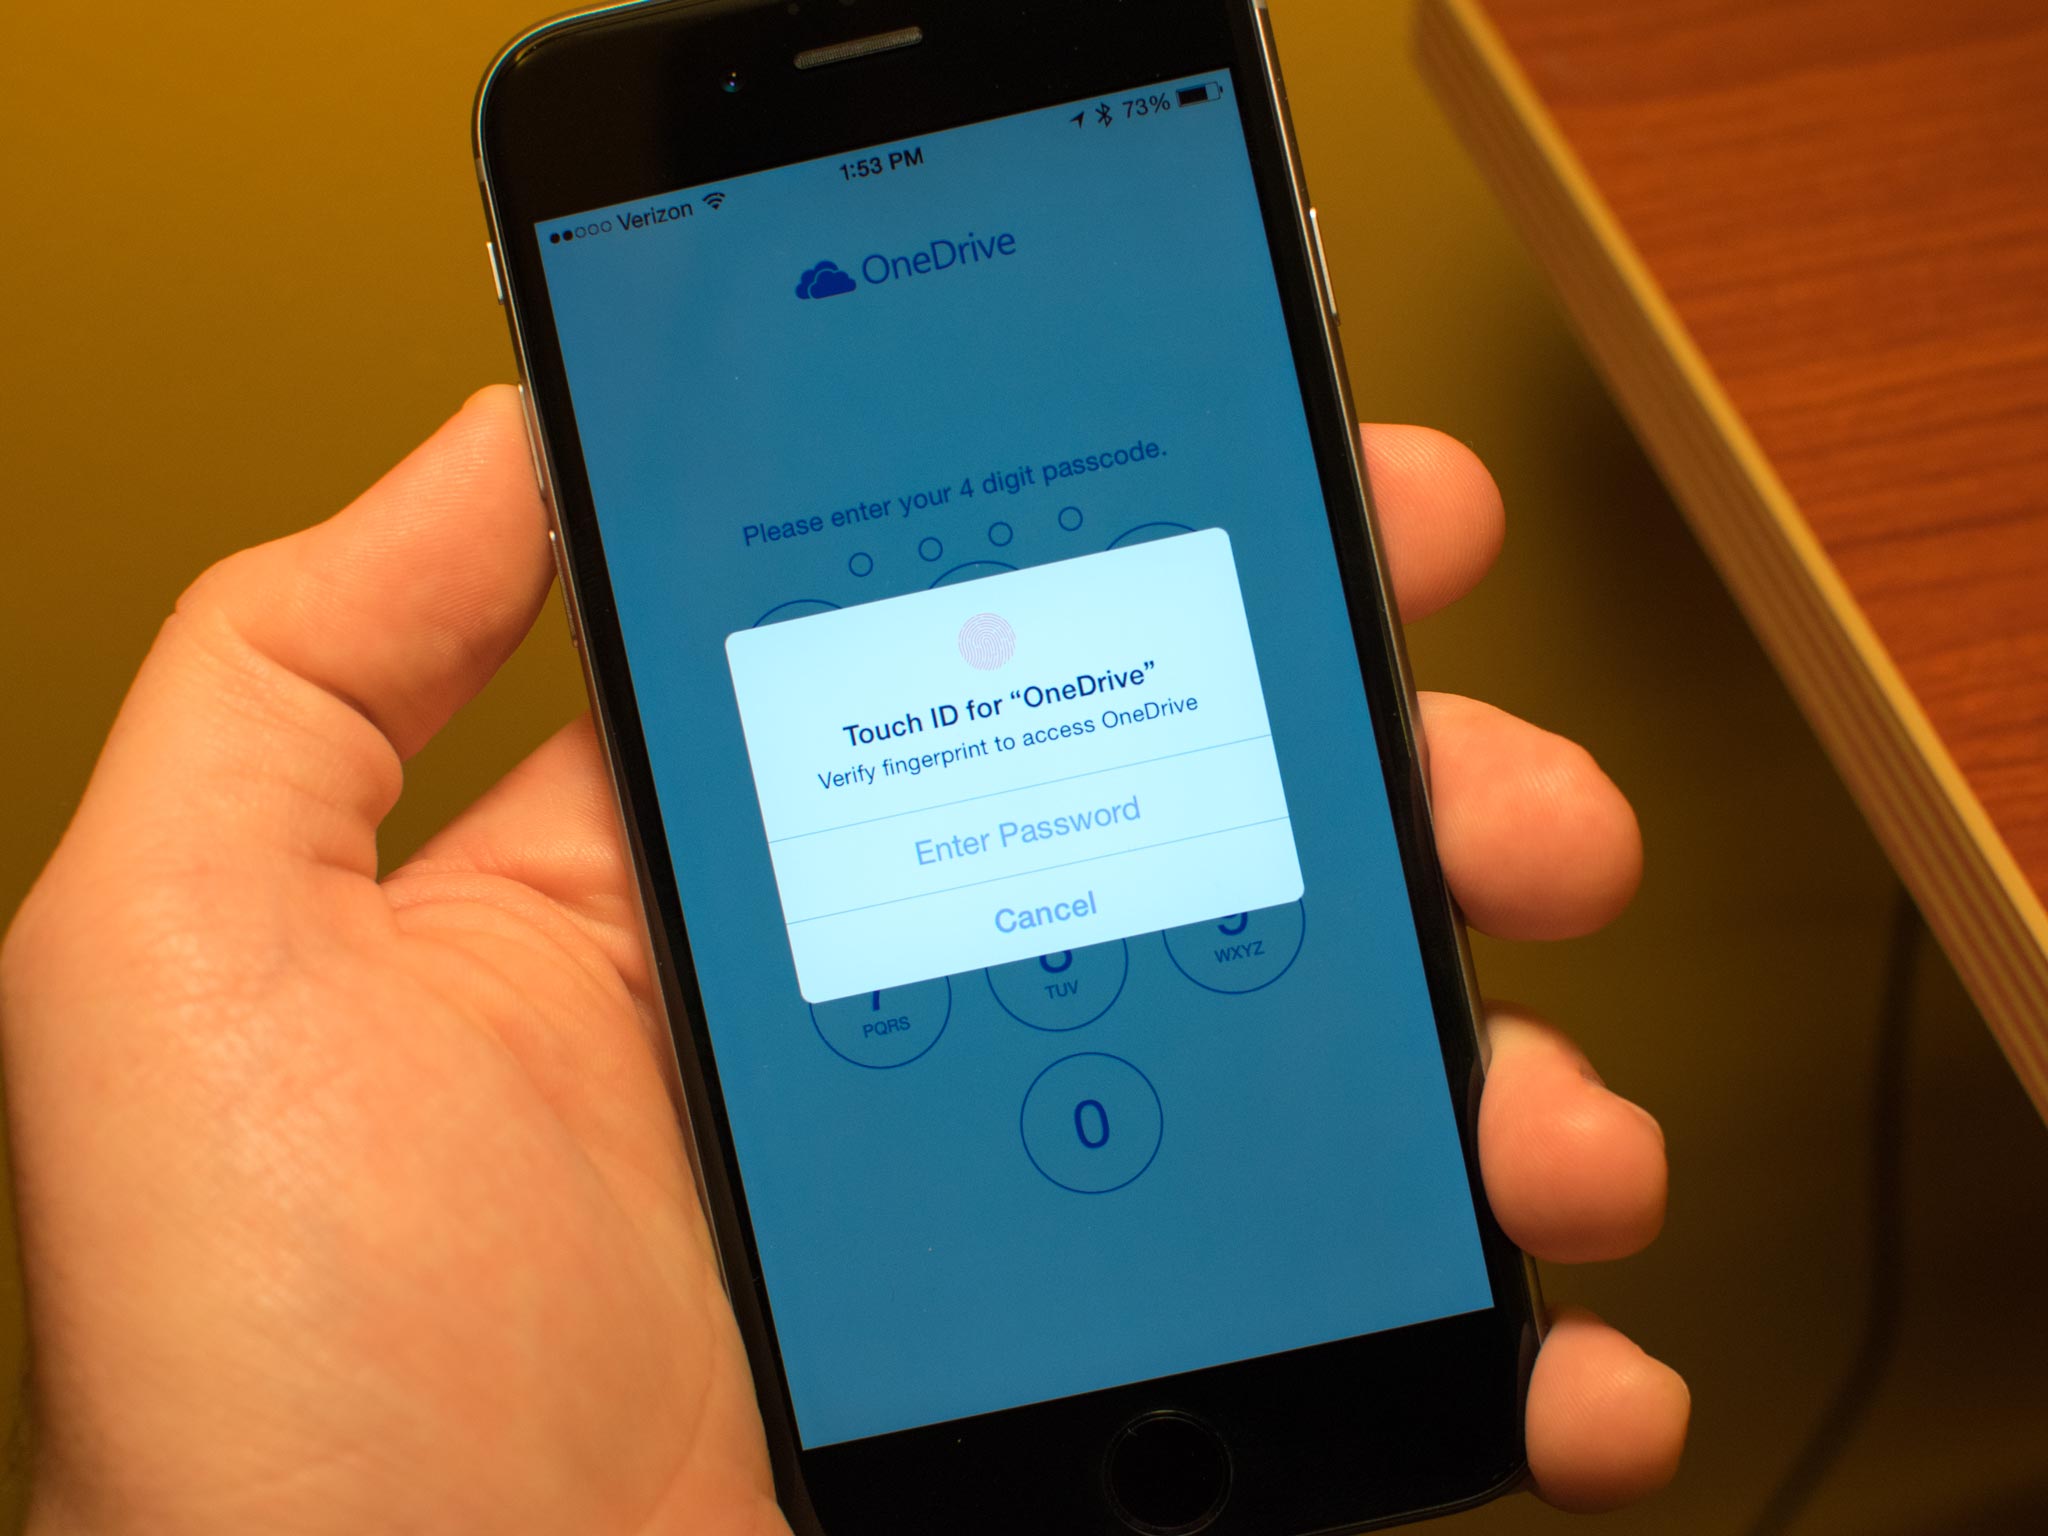 Microsoft OneDrive Touch ID, iPhone 6 and 6 plus support